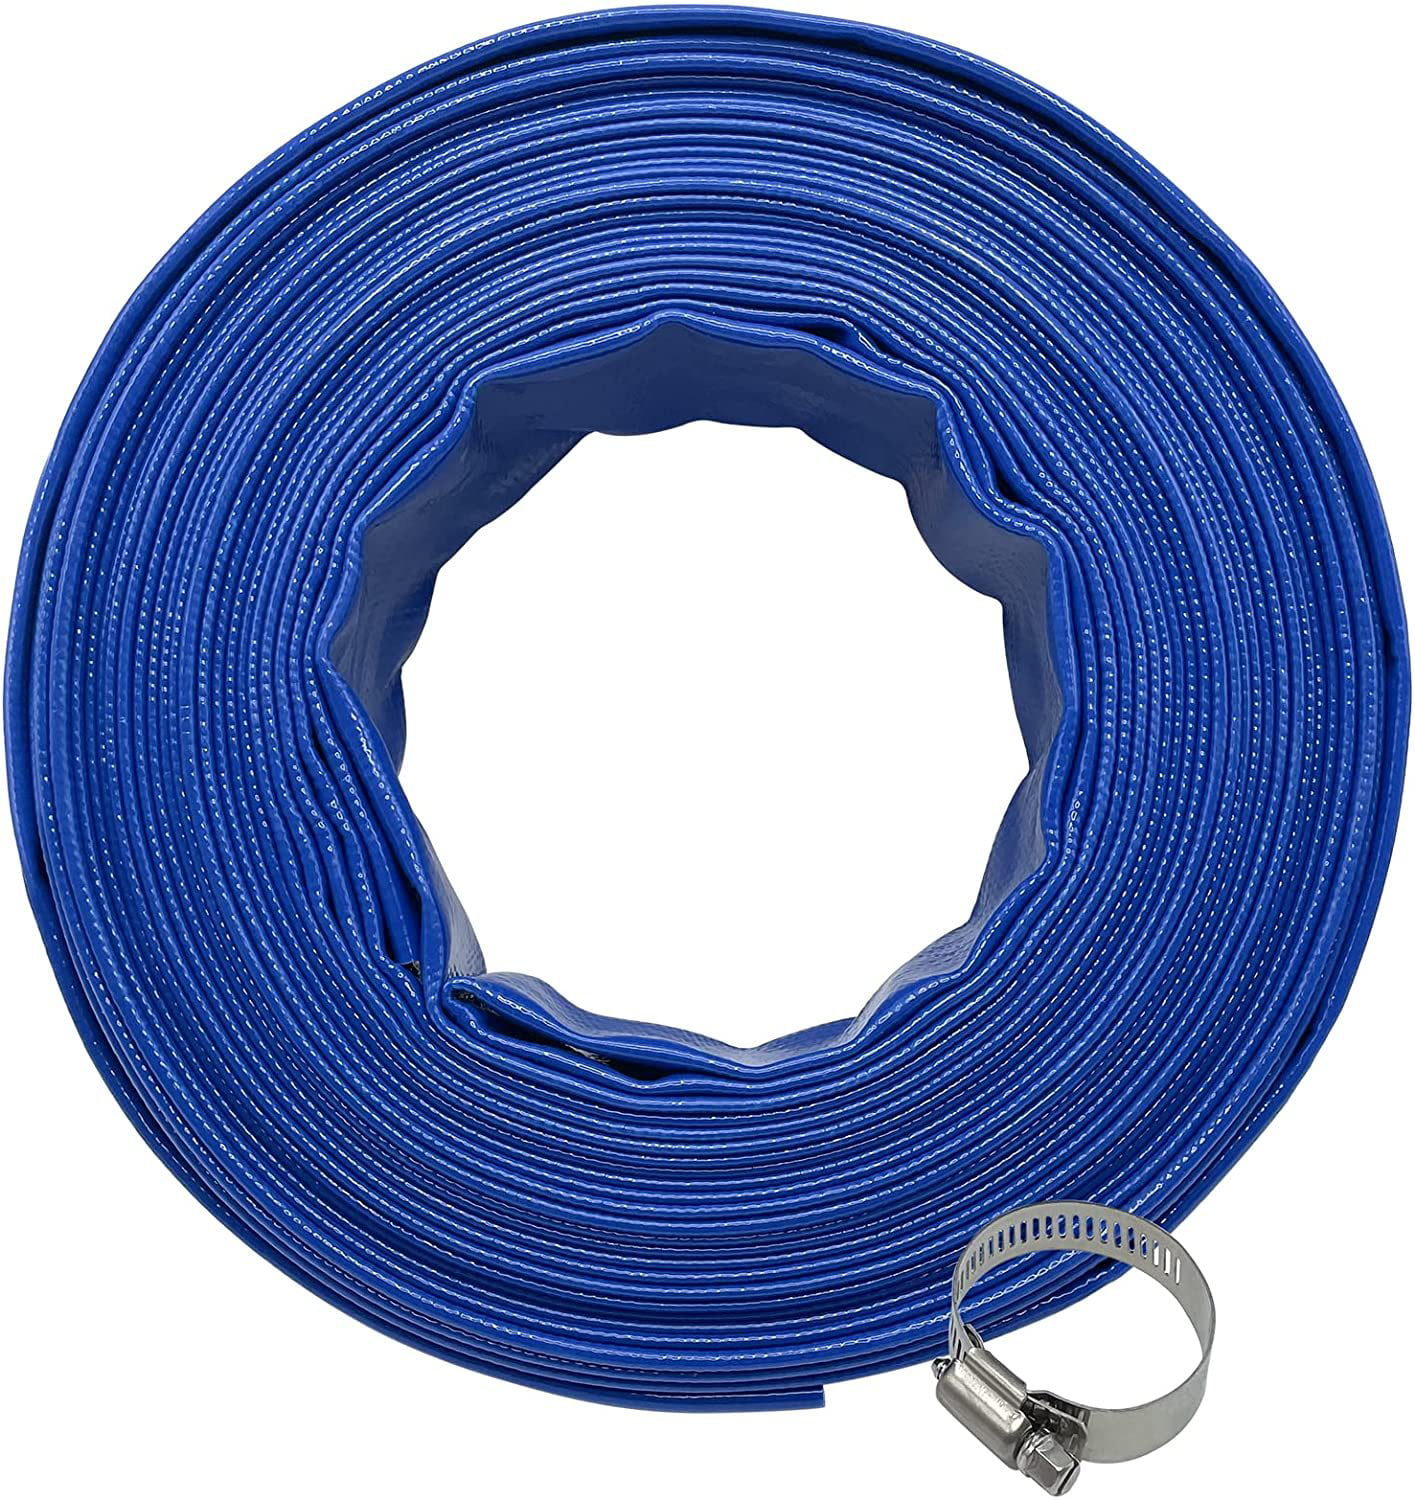 Pool Pump Hose For Discharge Poolzilla Swimming Pool Backwash Hose 2x100' Drain Hose For Above Ground Pools and Inground Pools- Durable PVC Pool Filter Hose 1 Hose